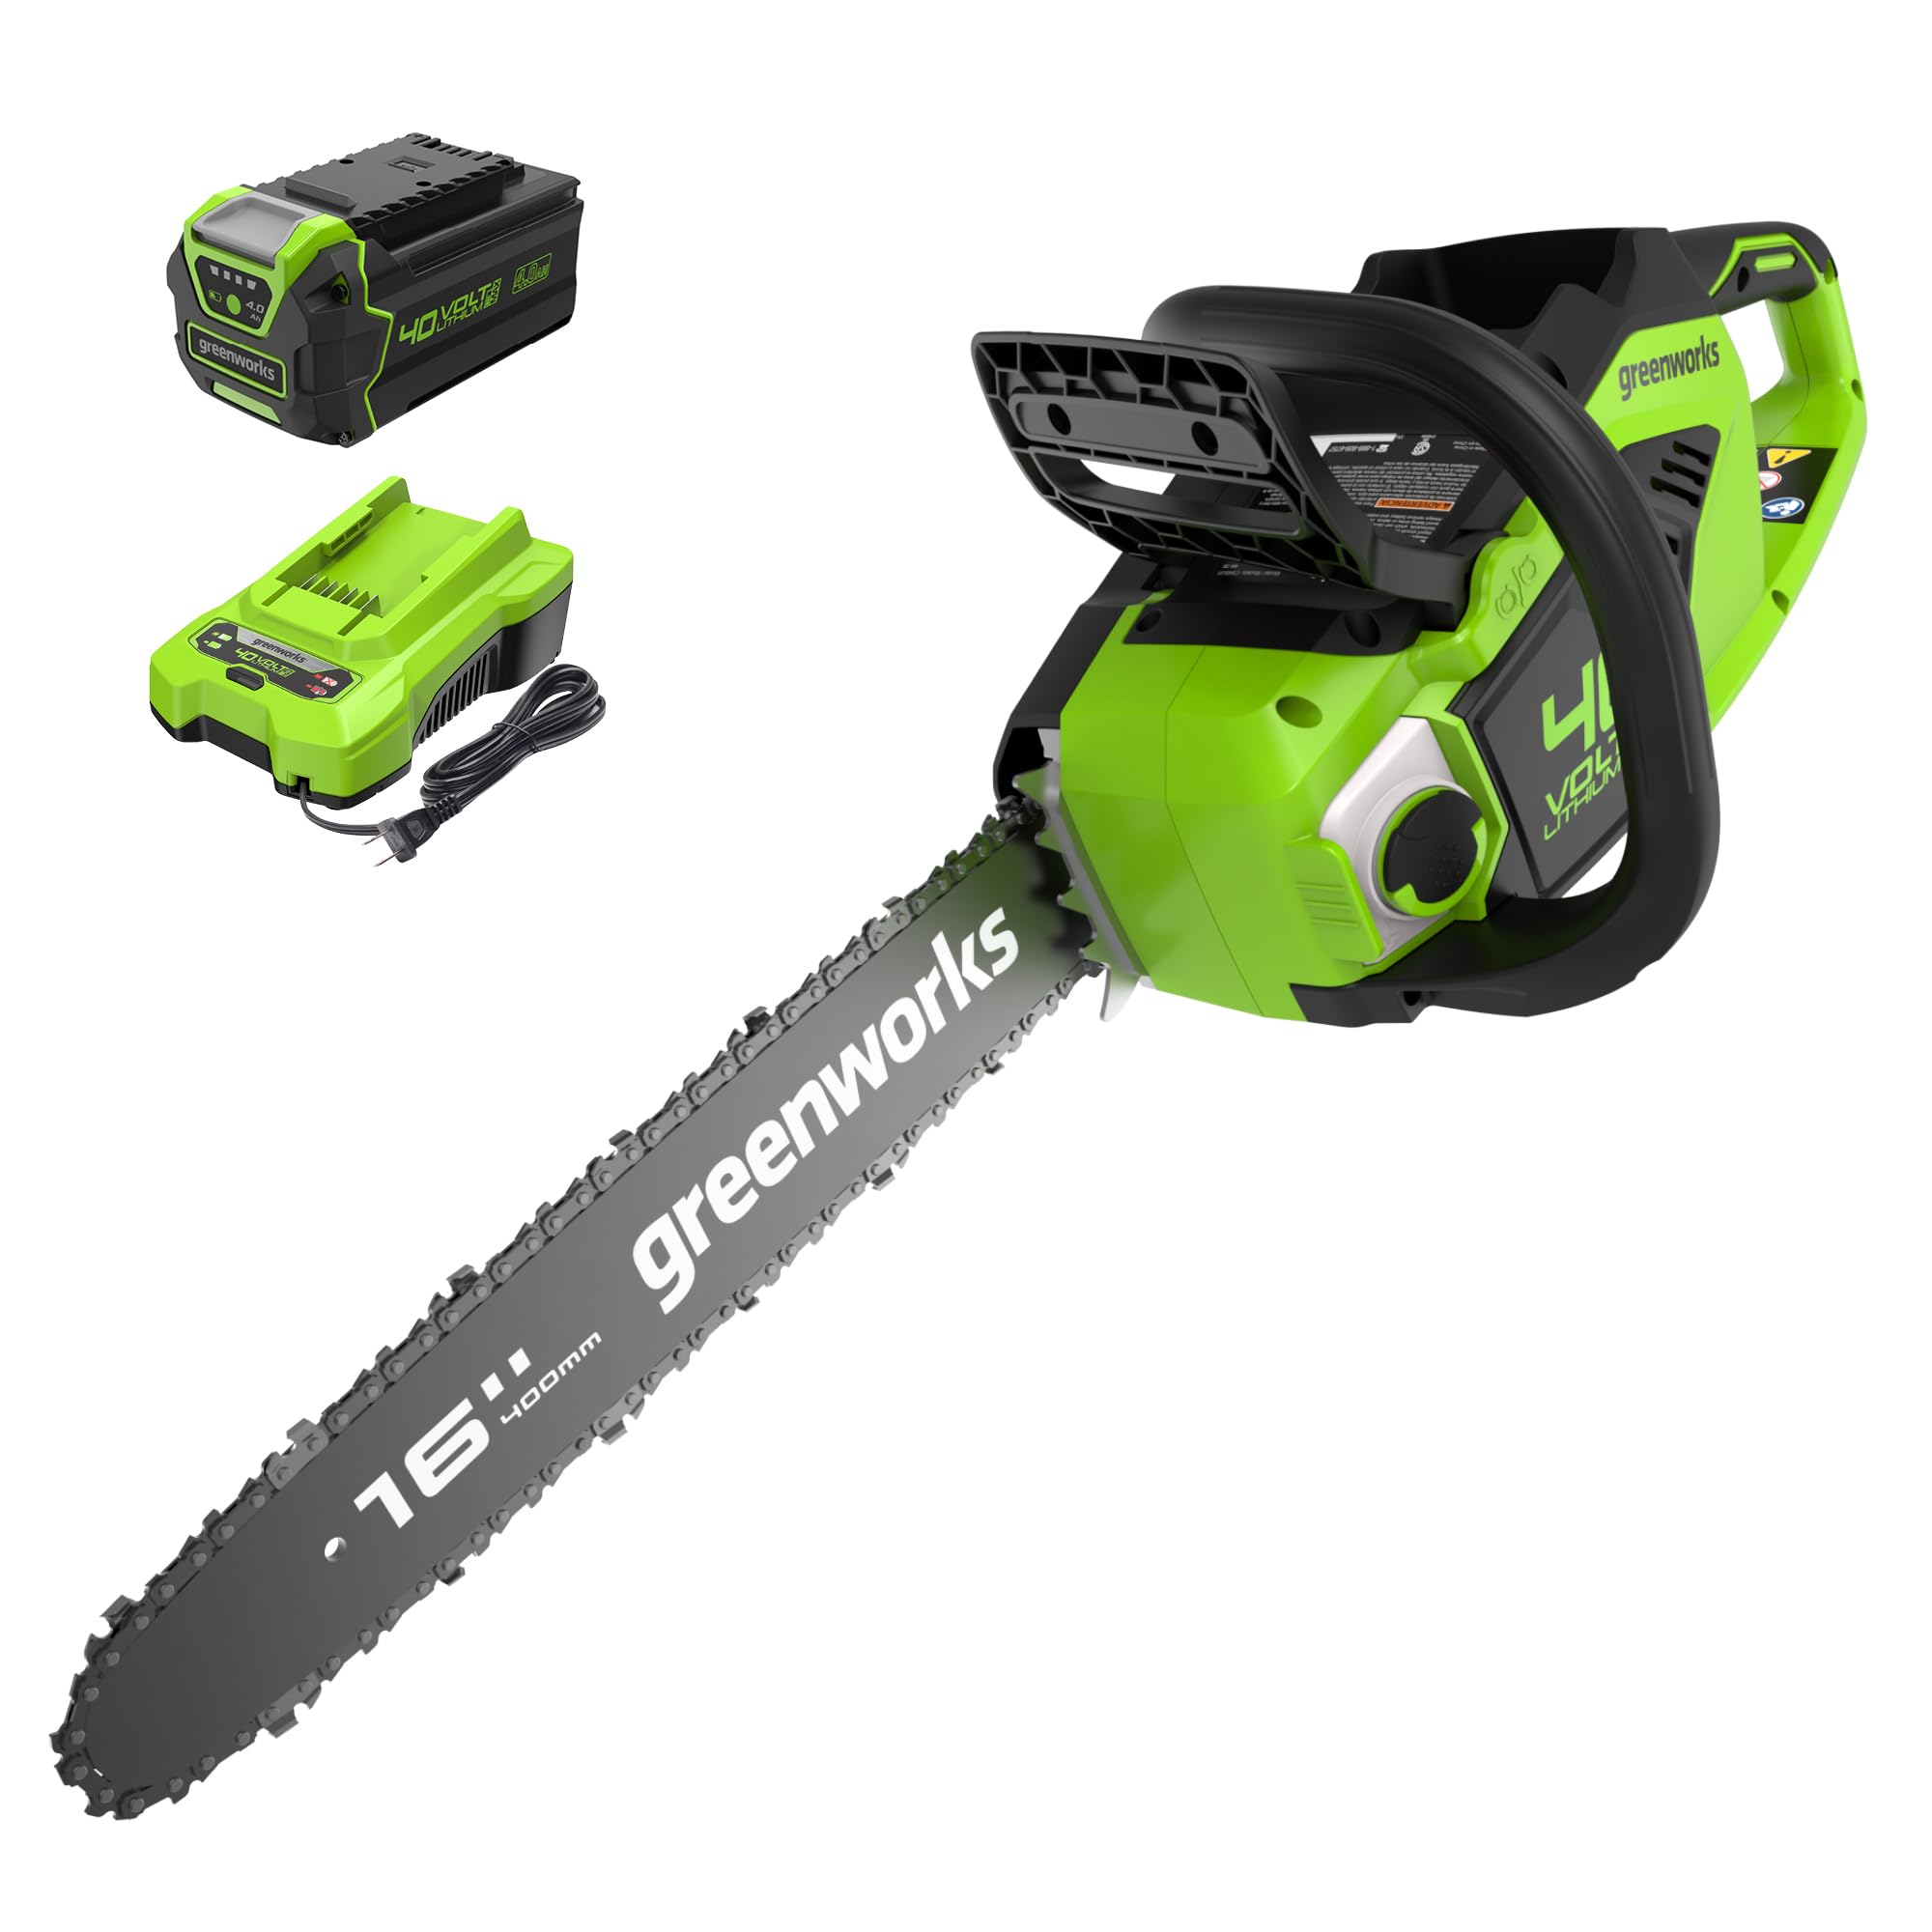 Greenworks 40V 16" Brushless Cordless Chainsaw (Gen 2) (Great For Tree Felling, Limbing, Pruning, and Firewood / 75+ Compatible Tools), 4.0Ah Battery and Charger Included